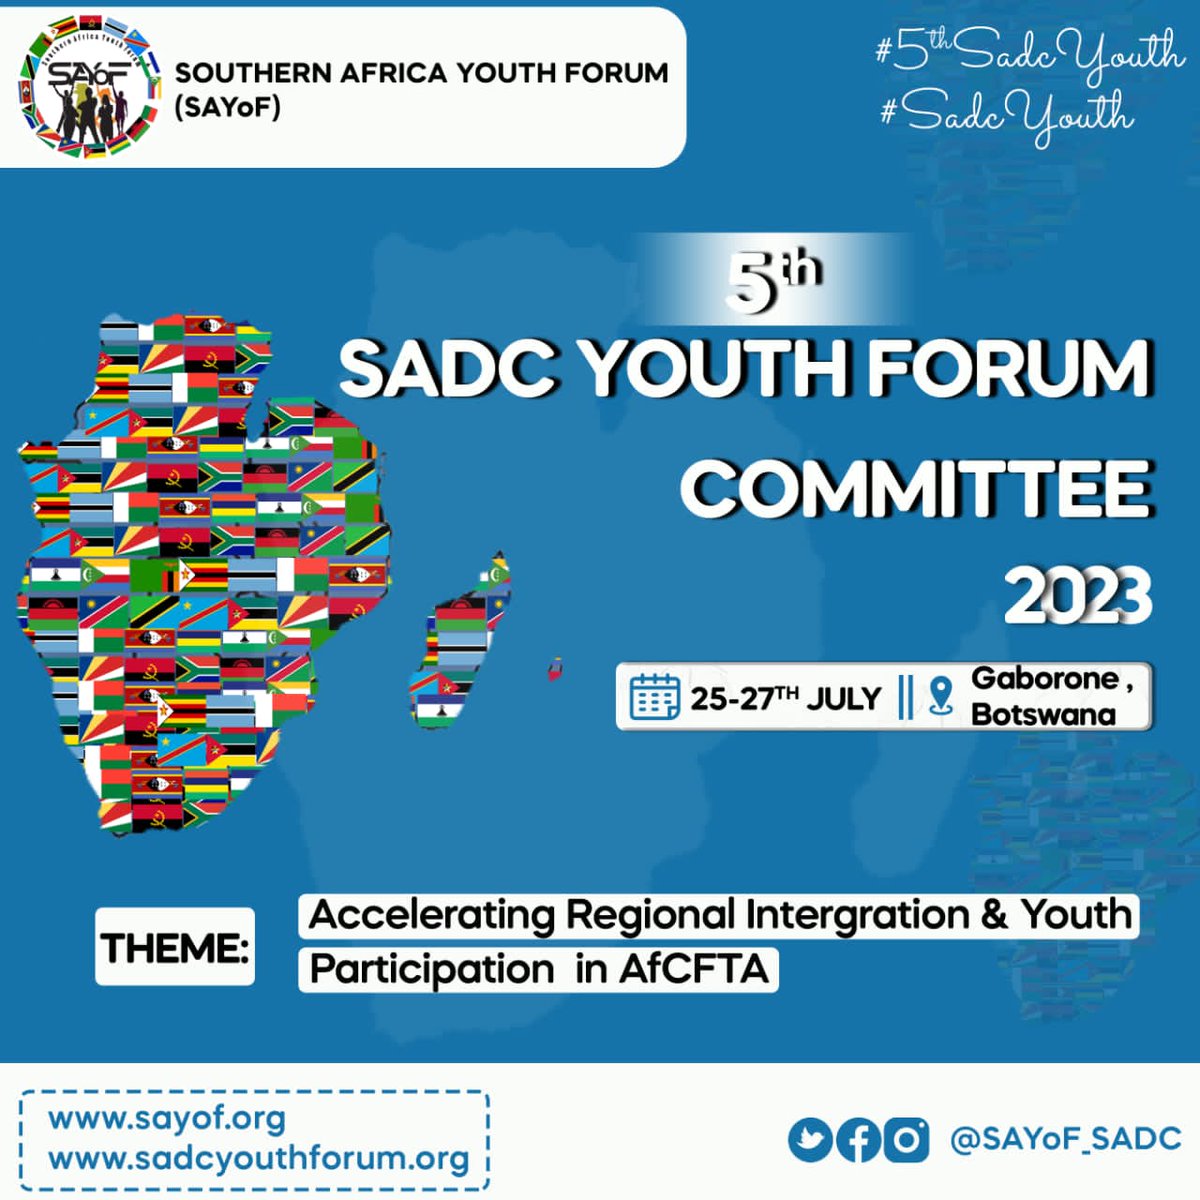 📢📢Big news on the horizon: Stay tuned for the Announcement of the 5th SADC Youth Forum Committee.
#SADCYouth #SADCYouthForum